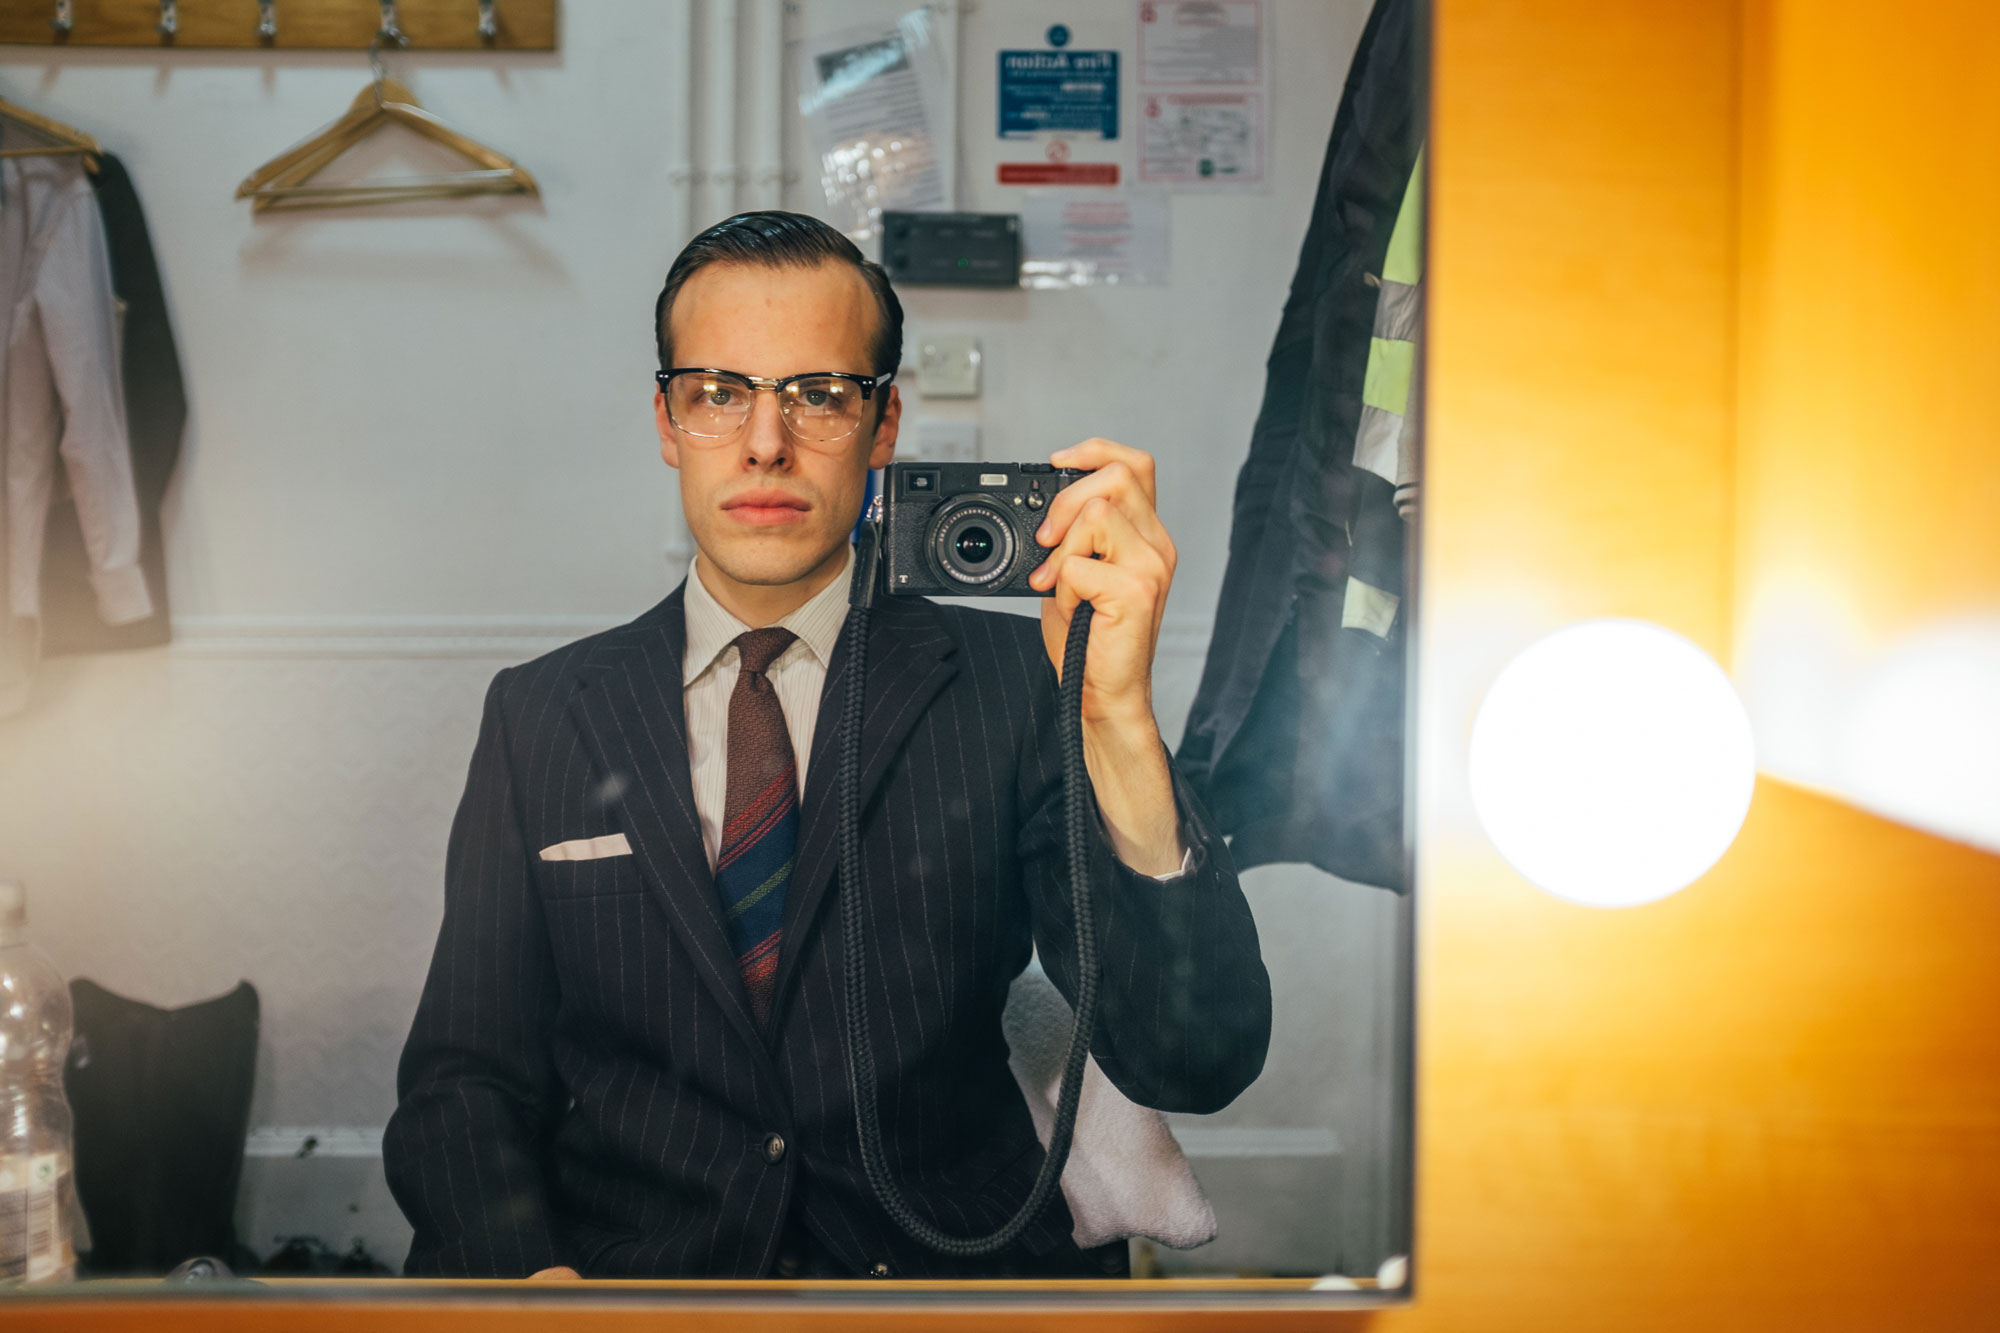 man taking a picture in the mirror: wearing a striped suit and glasses